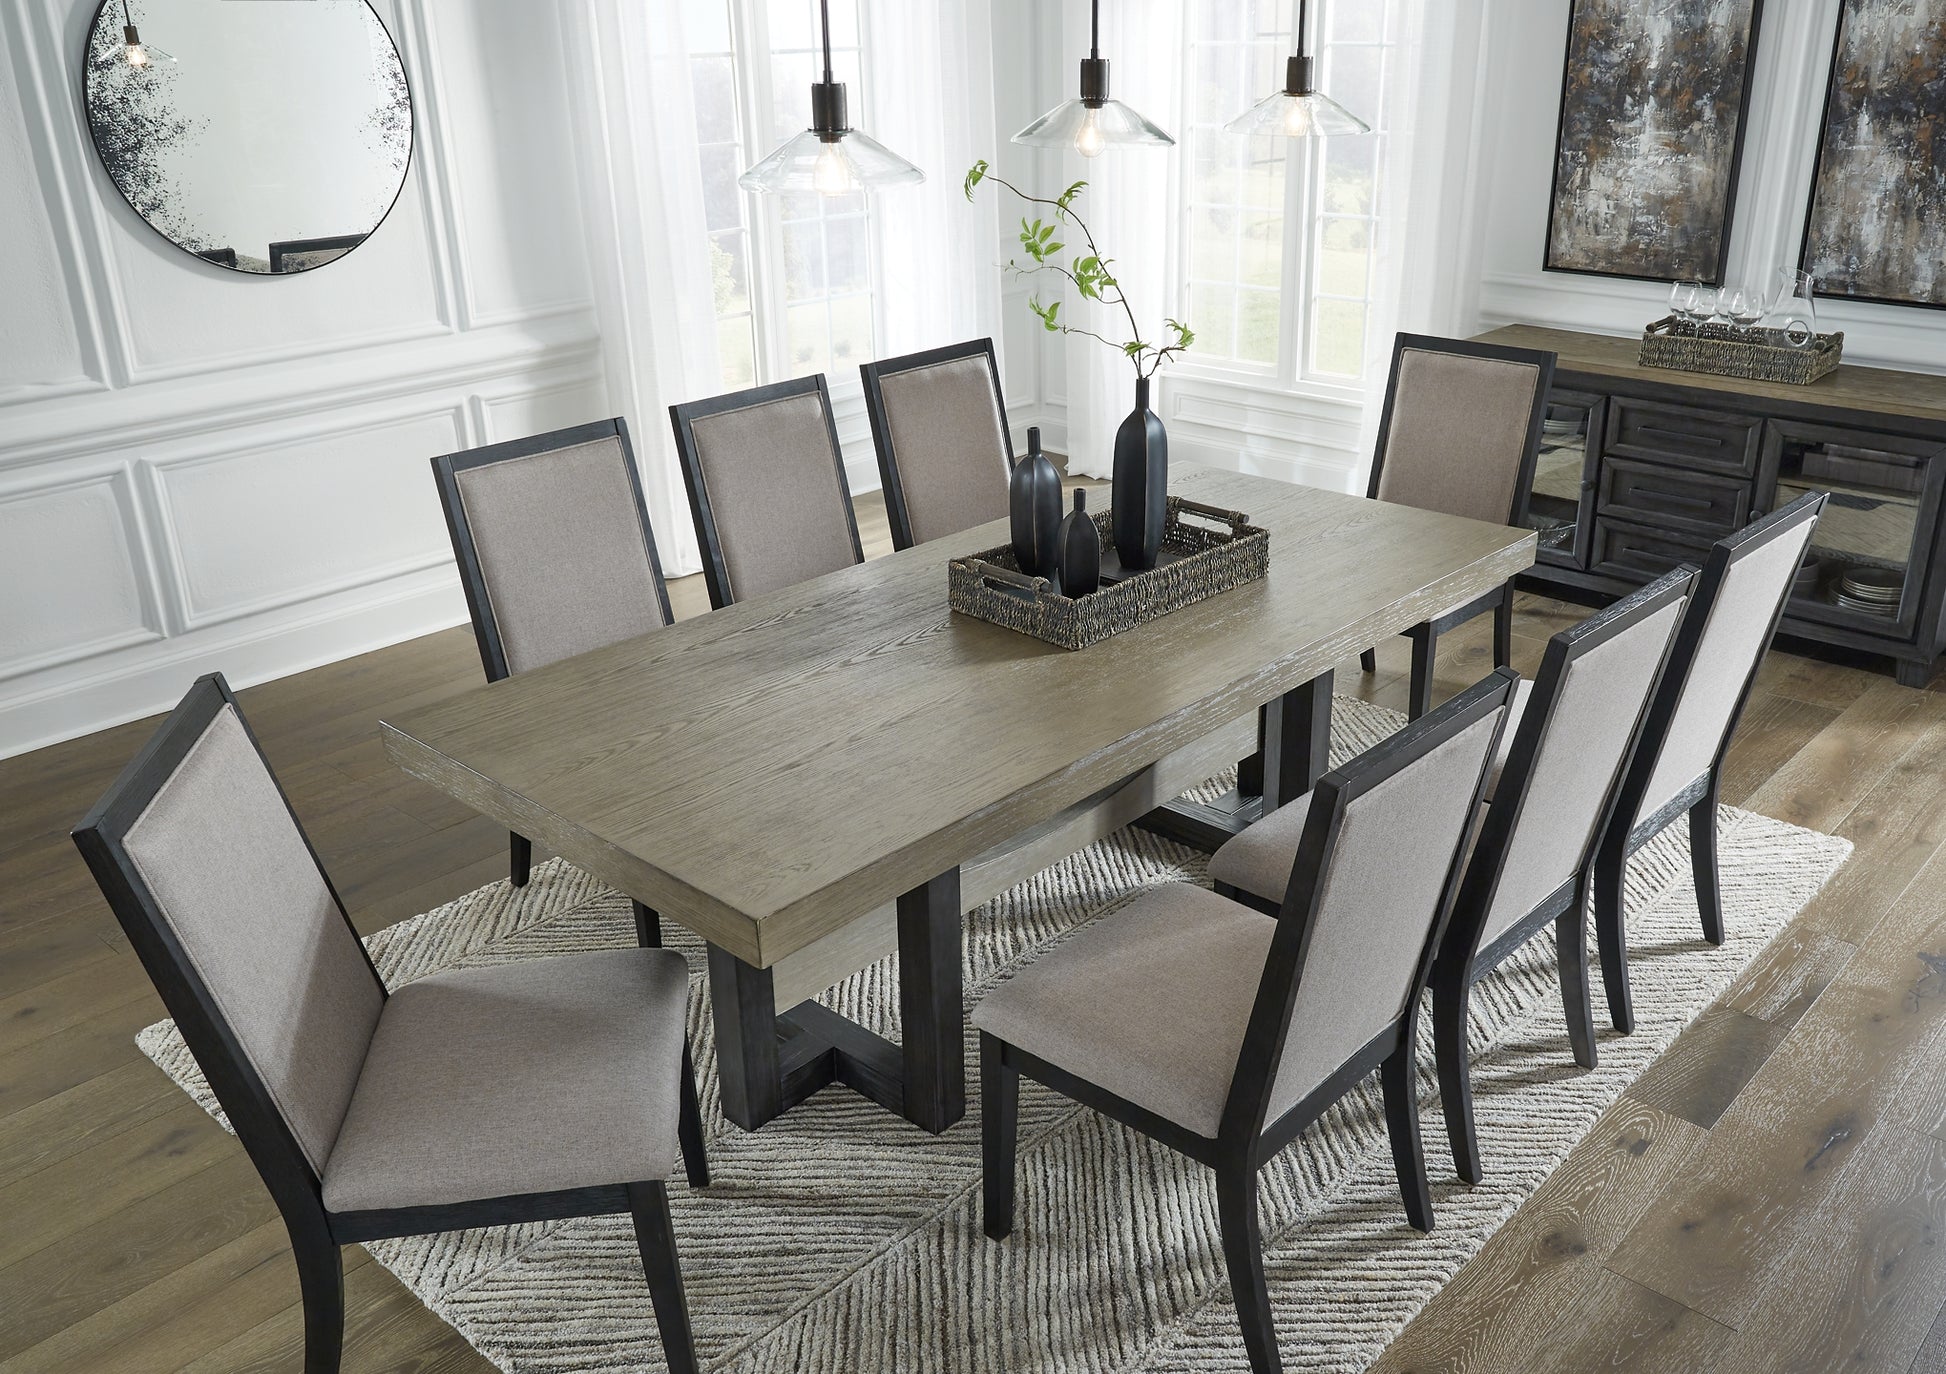 Foyland Dining Table and 8 Chairs Wilson Furniture (OH)  in Bridgeport, Ohio. Serving Bridgeport, Yorkville, Bellaire, & Avondale